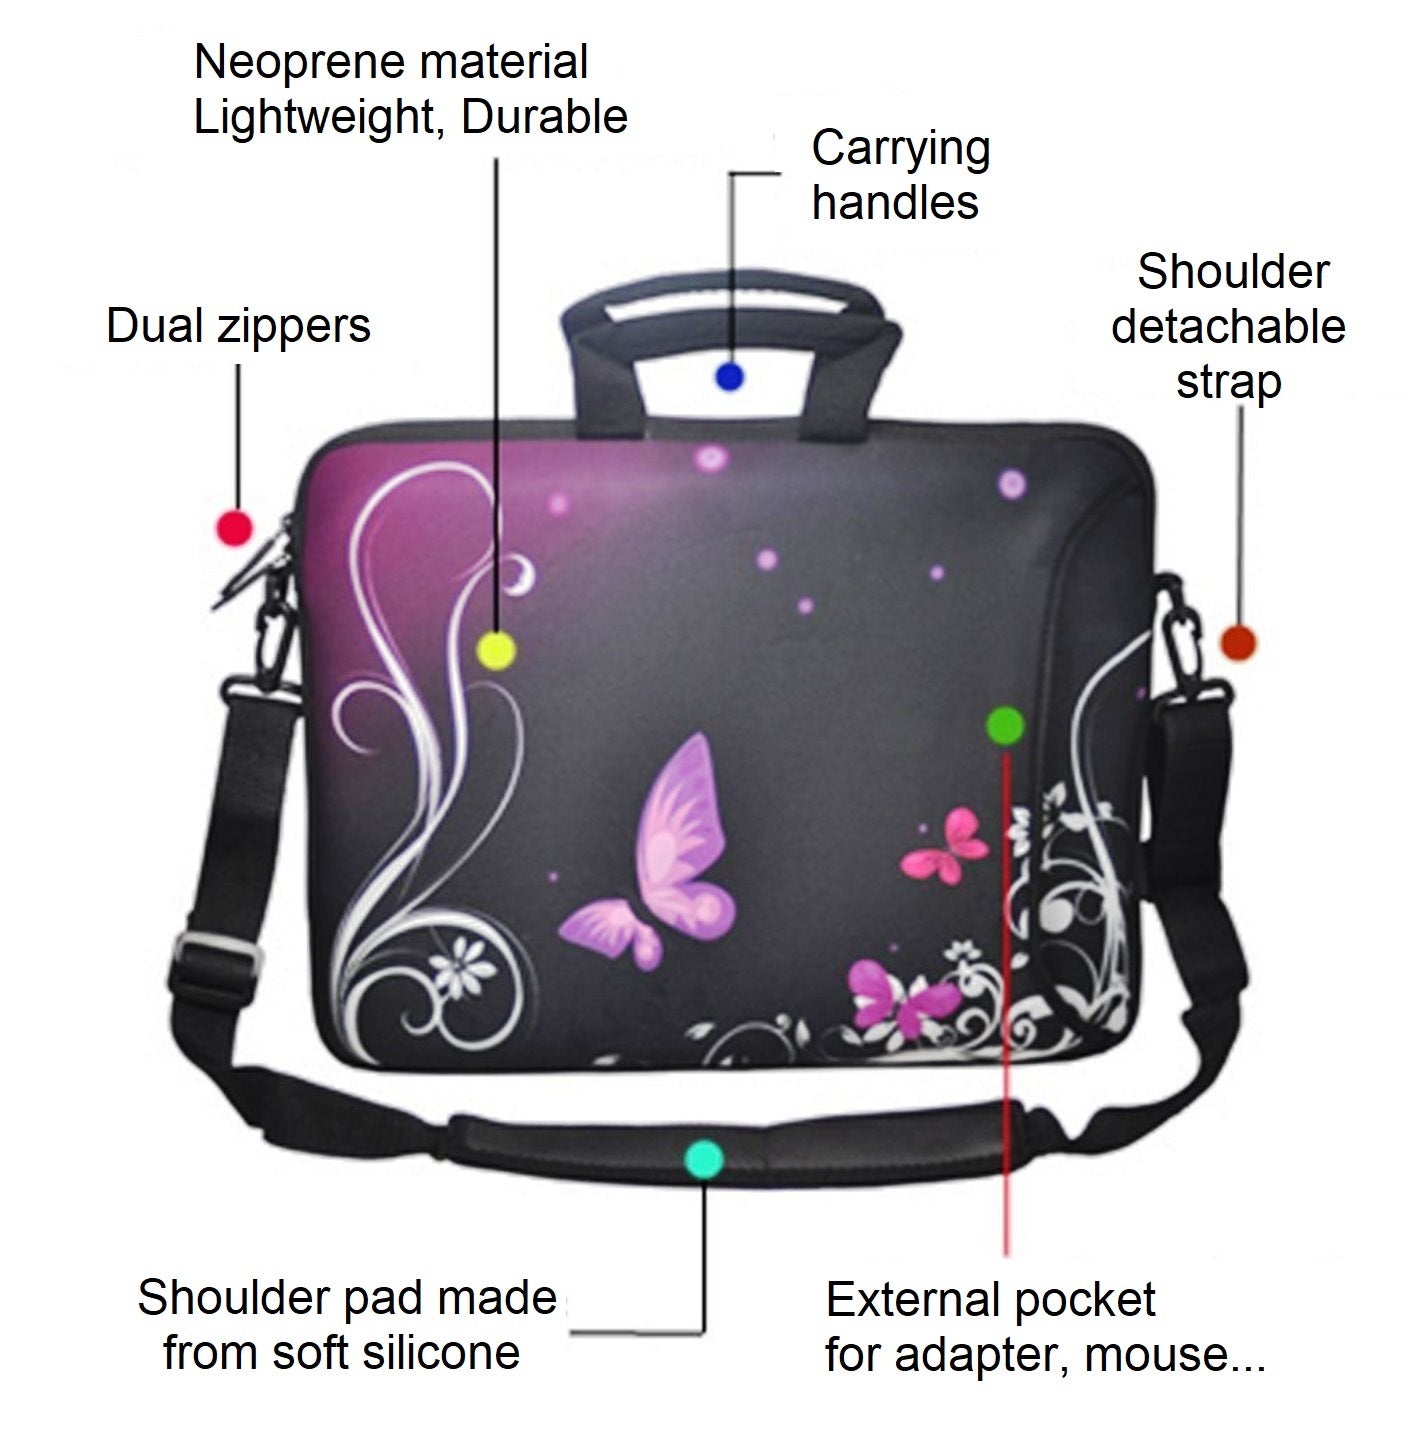 15"- 15.6" (inch) LAPTOP BAG CARRY CASE/BAG WITH HANDLE & STRAP NEOPRENE FOR LAPTOPS/NOTEBOOKS, *Cat Astronaut*